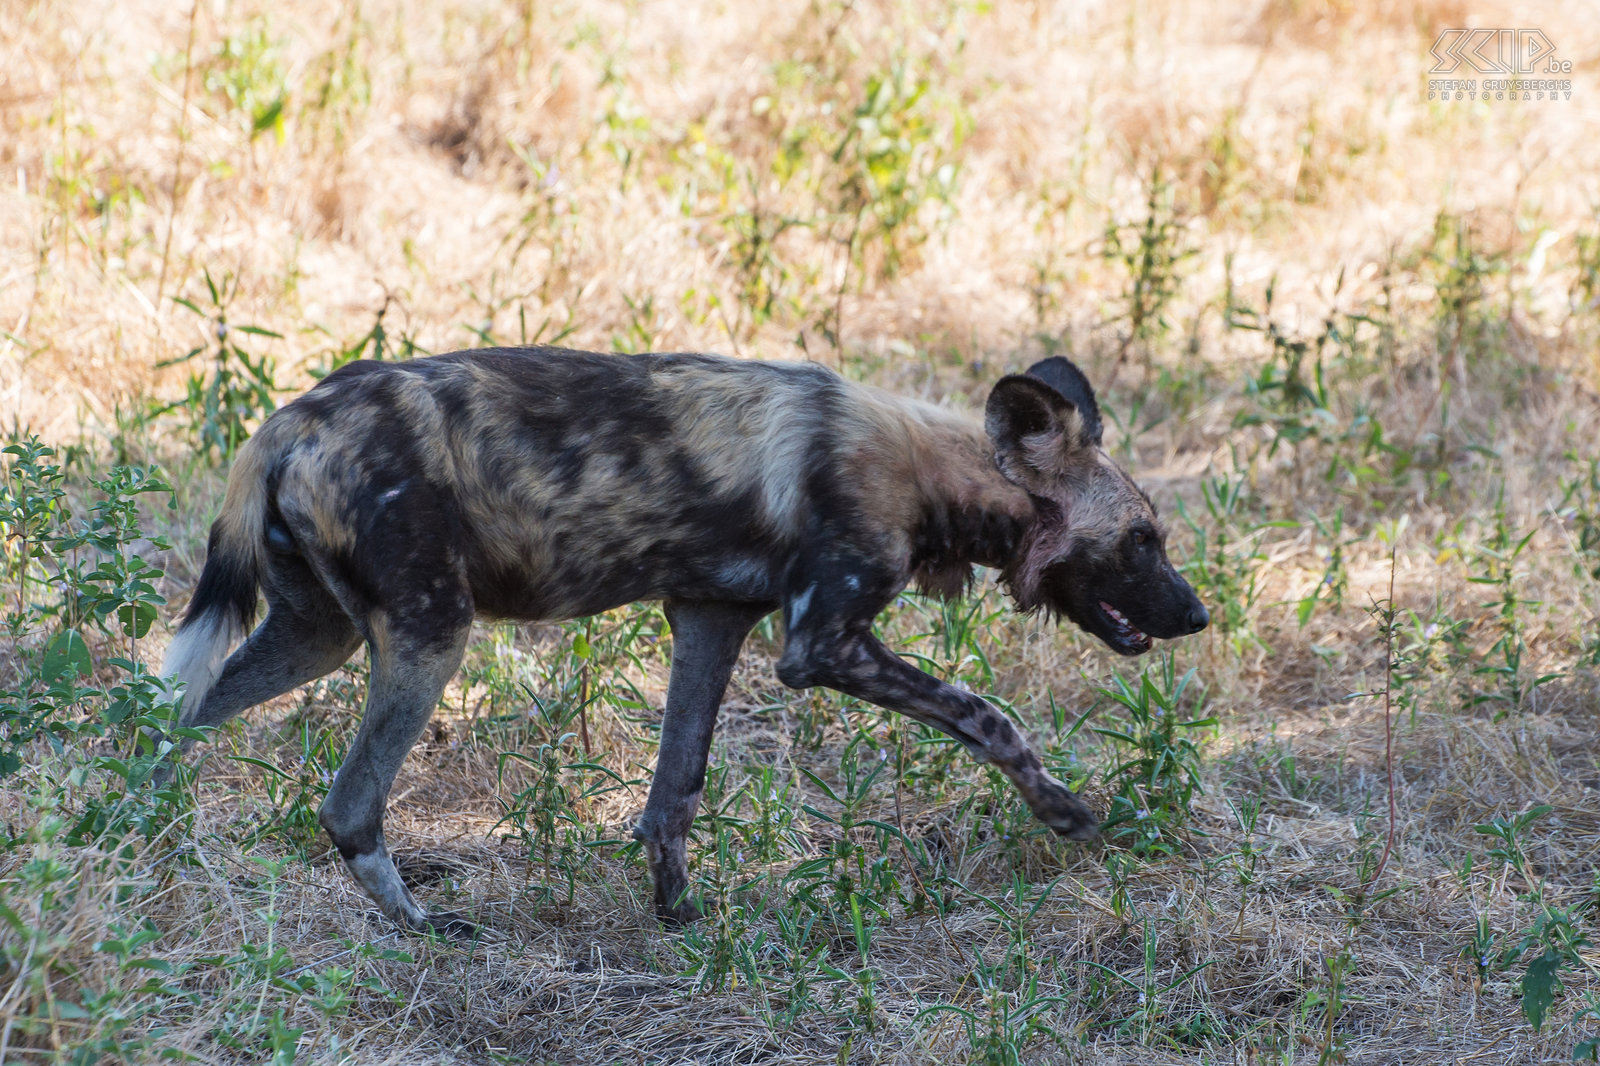 South Luangwa - Wild dog During our 5 days of safari in South Luangwa we also encountered a pack of African wild dogs (African Painted dog, Lycaon pictus) several times. It is an endangered species that can travel huge distances.  Stefan Cruysberghs